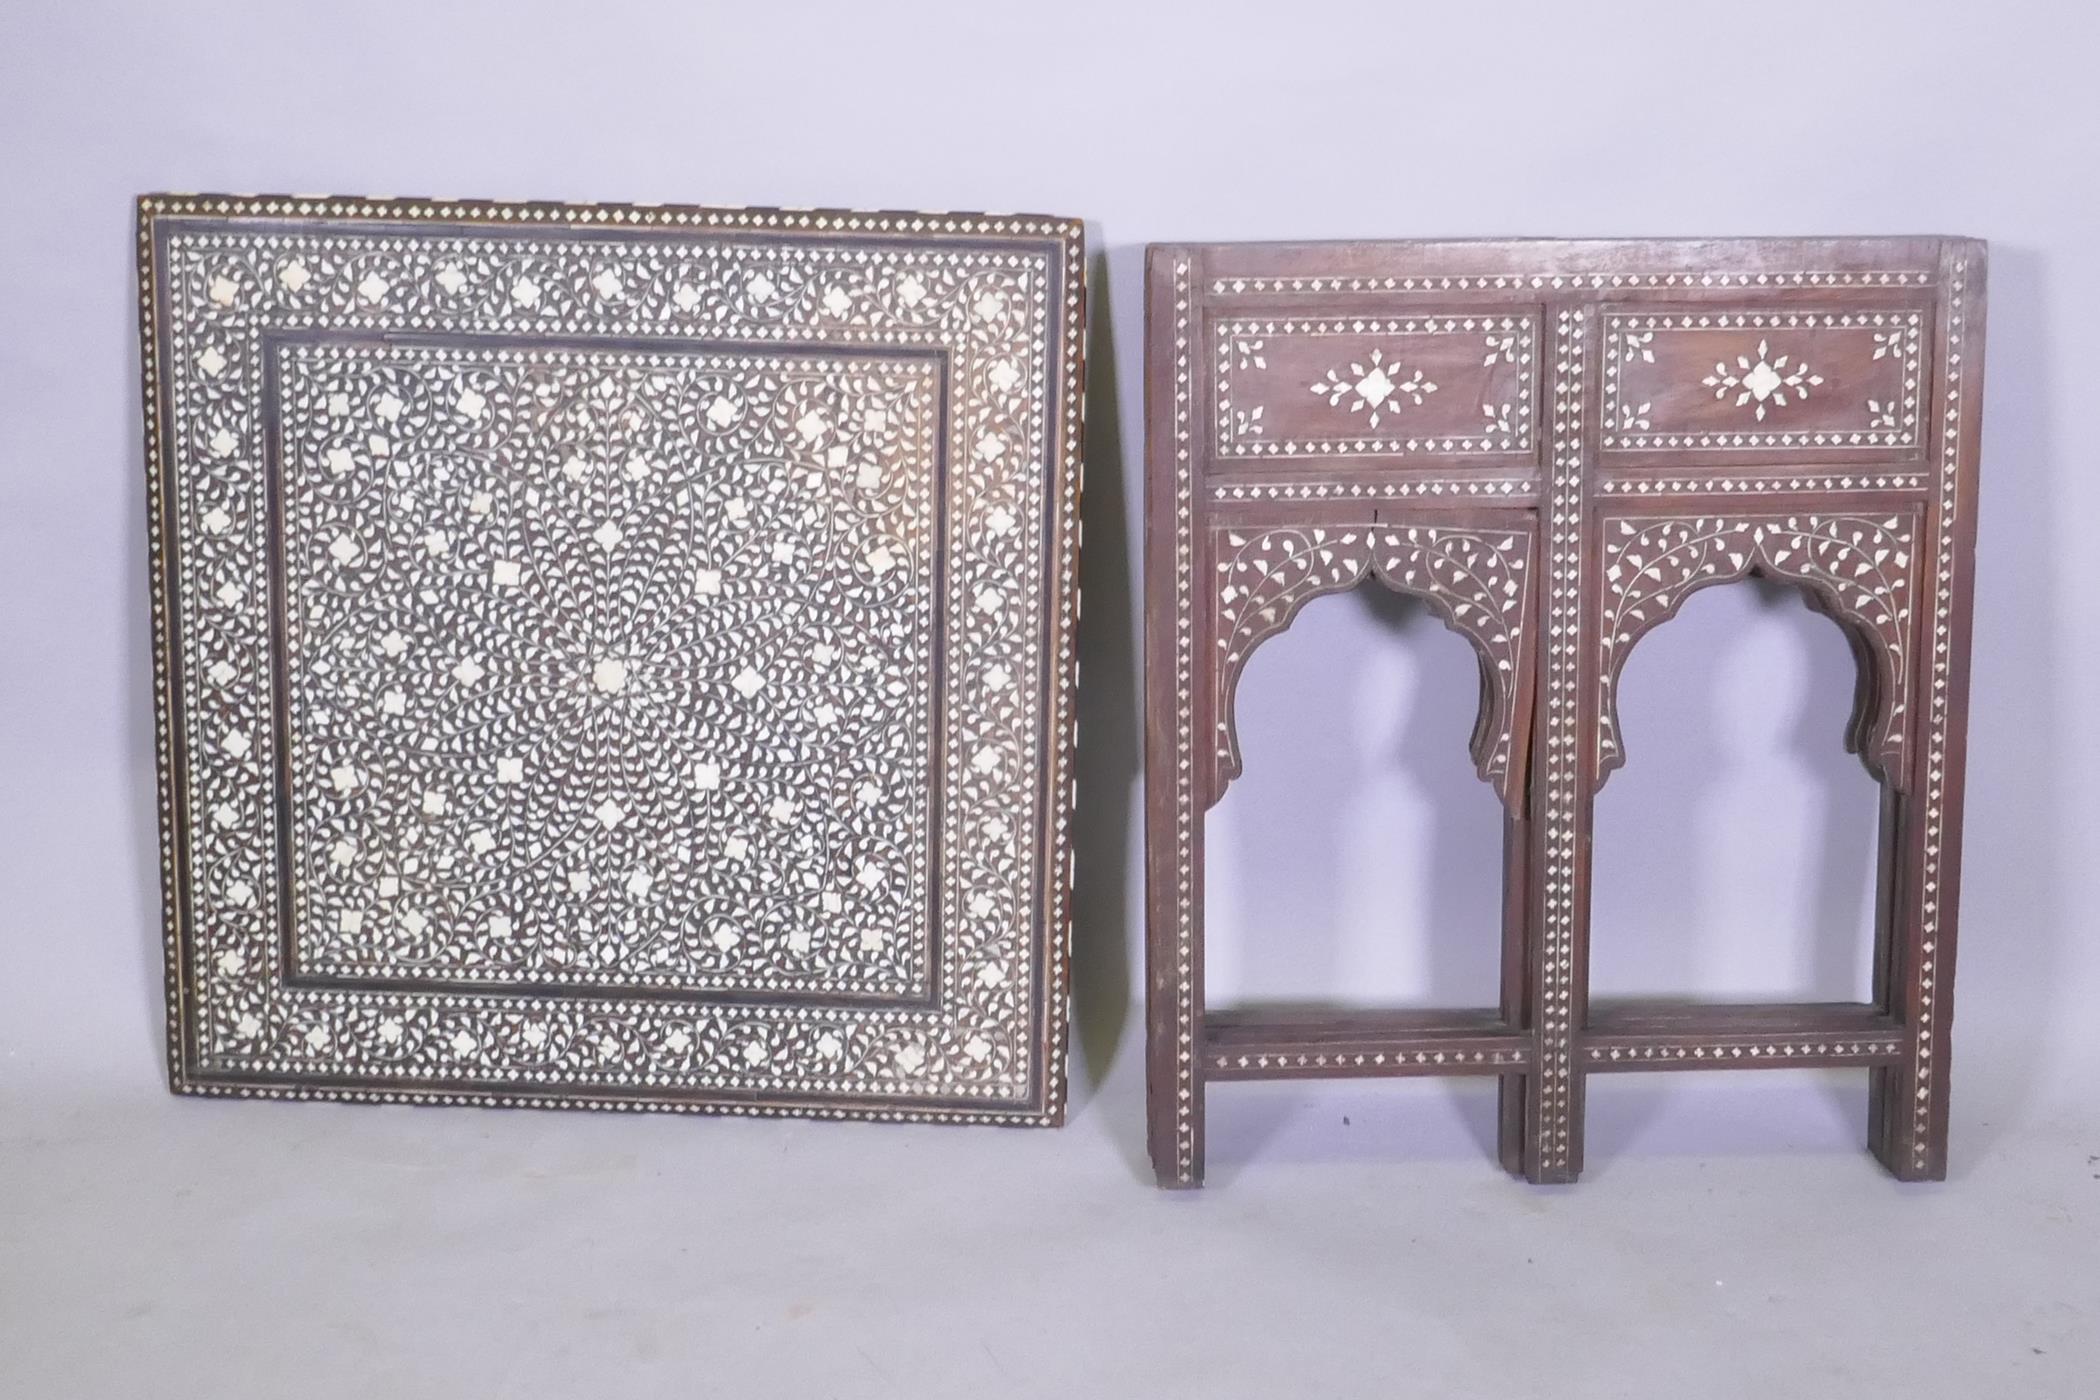 A C19th Moorish table with inlaid decoration and folding base, 61 x 61 x 63cm - Image 5 of 5